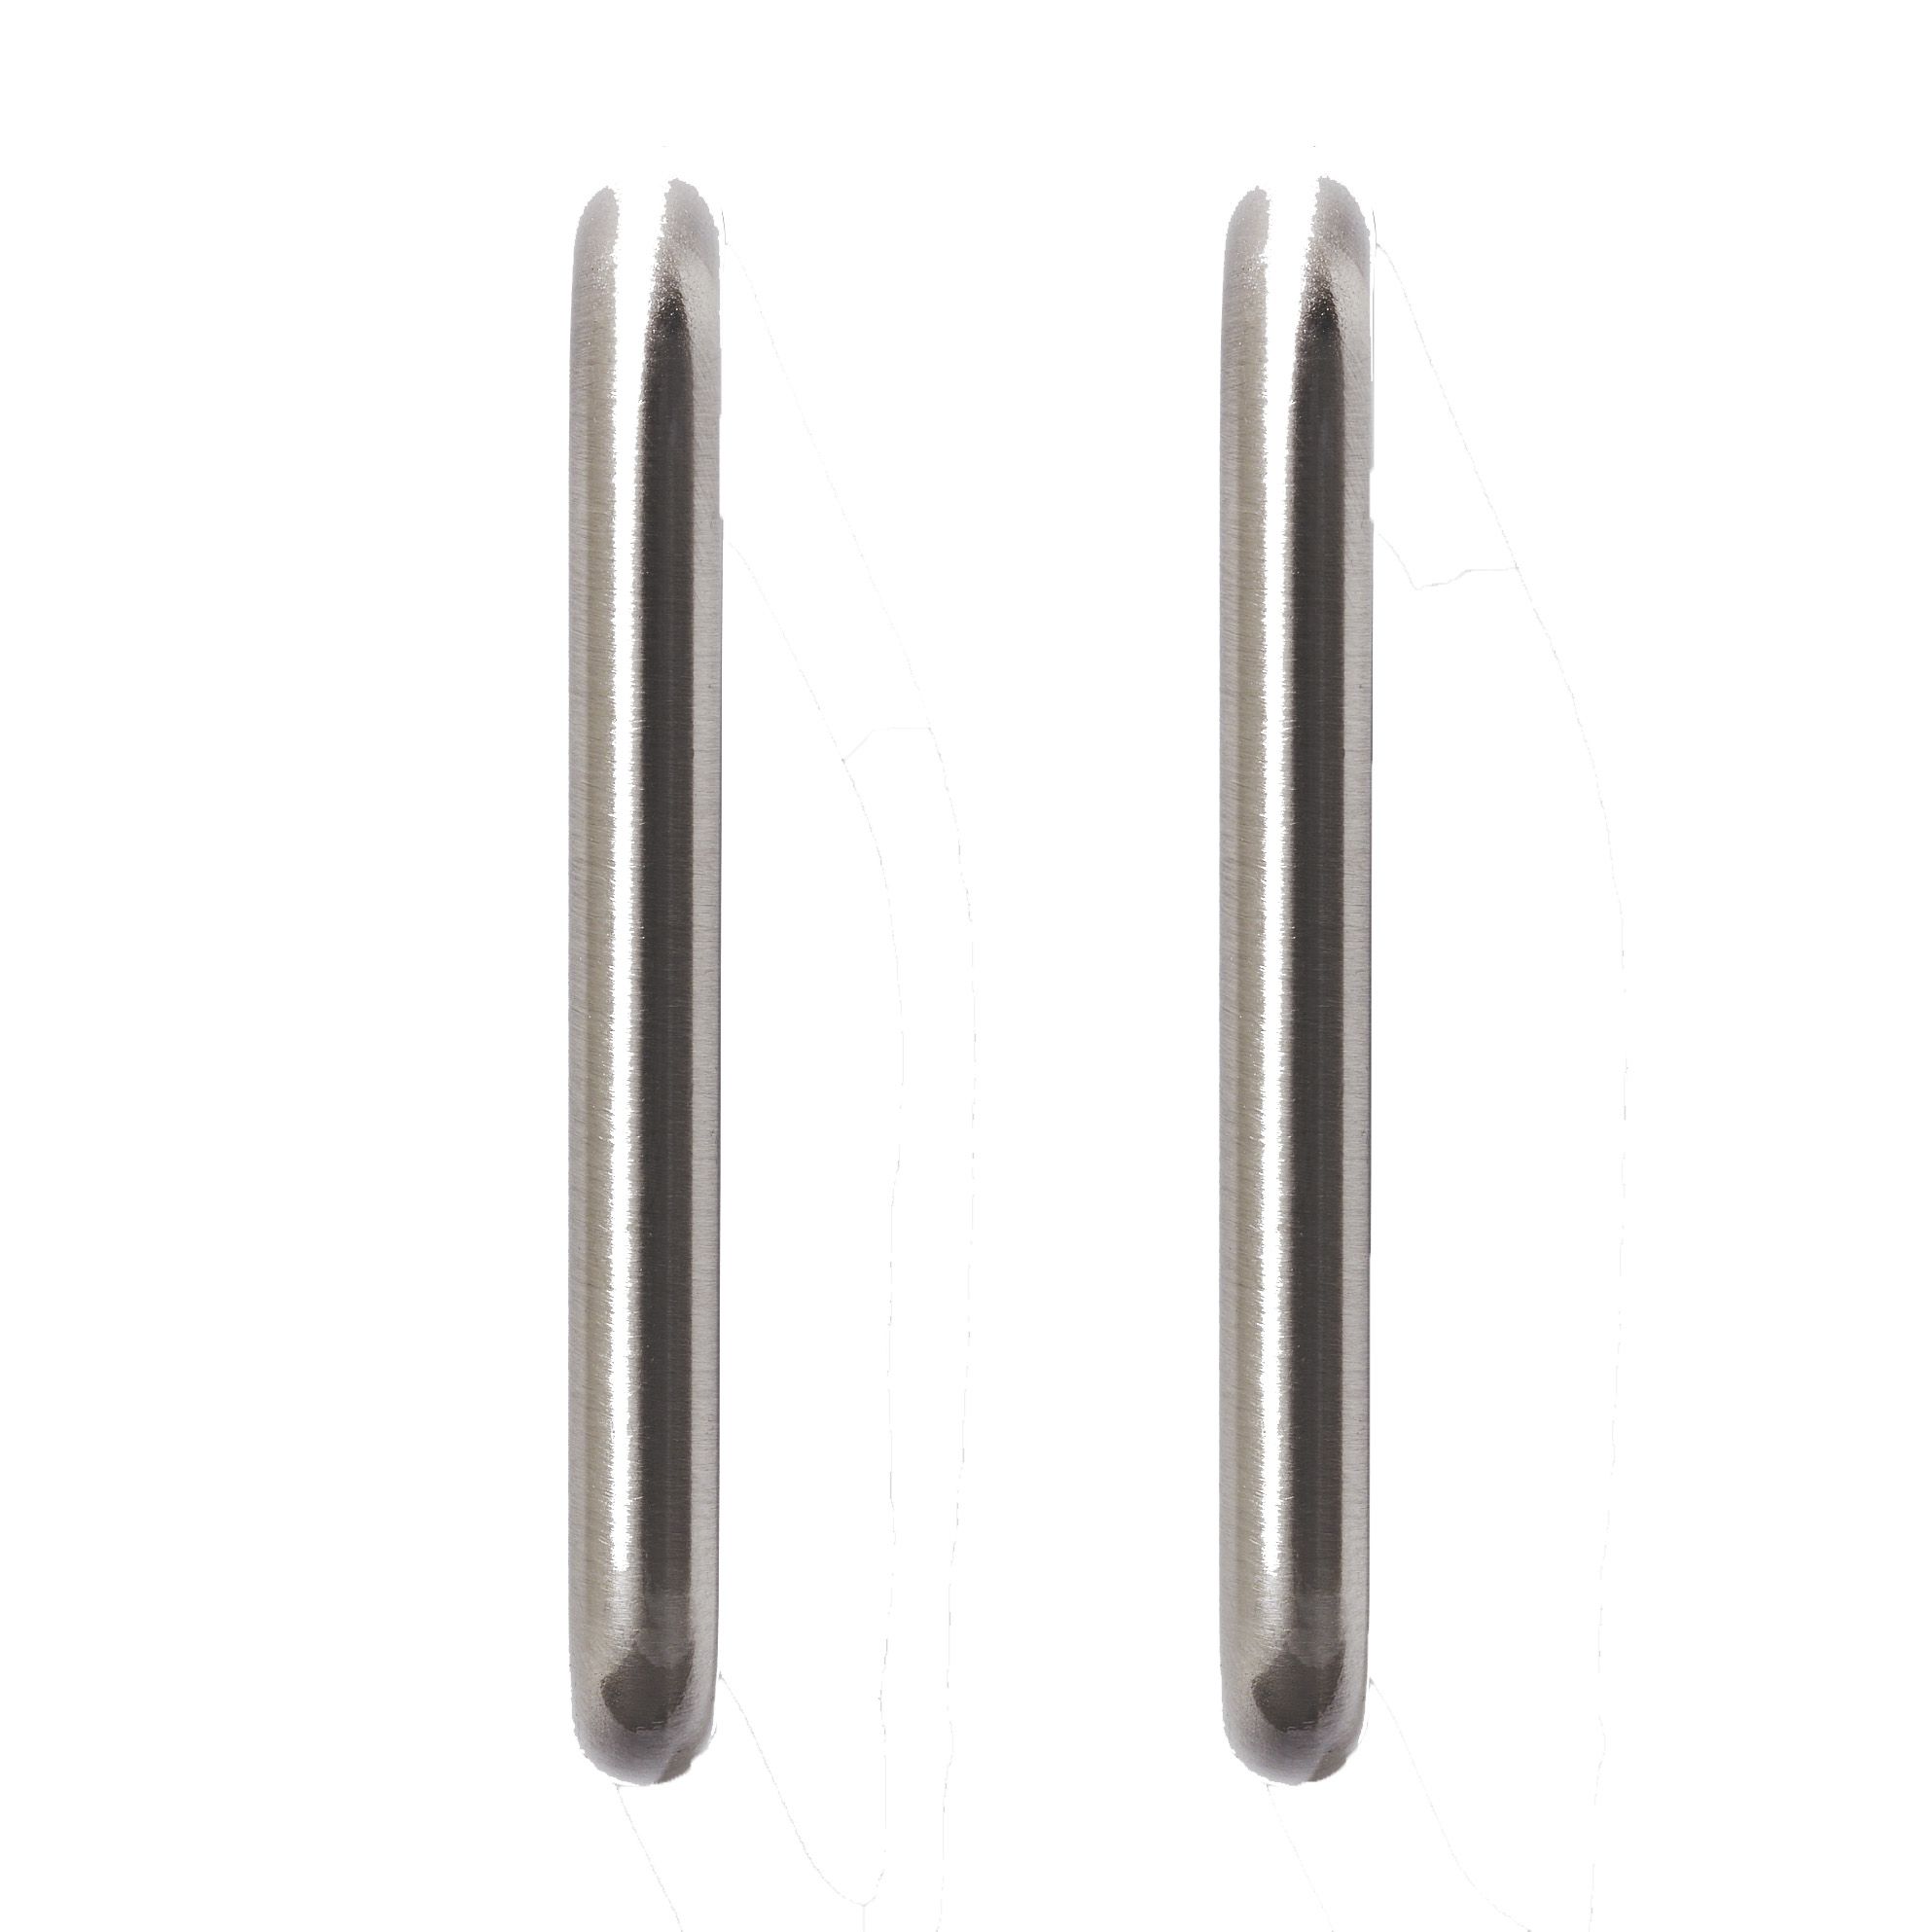 GoodHome Gen Nickel effect Kitchen cabinets Handle (L)10.6cm, Pack of 2